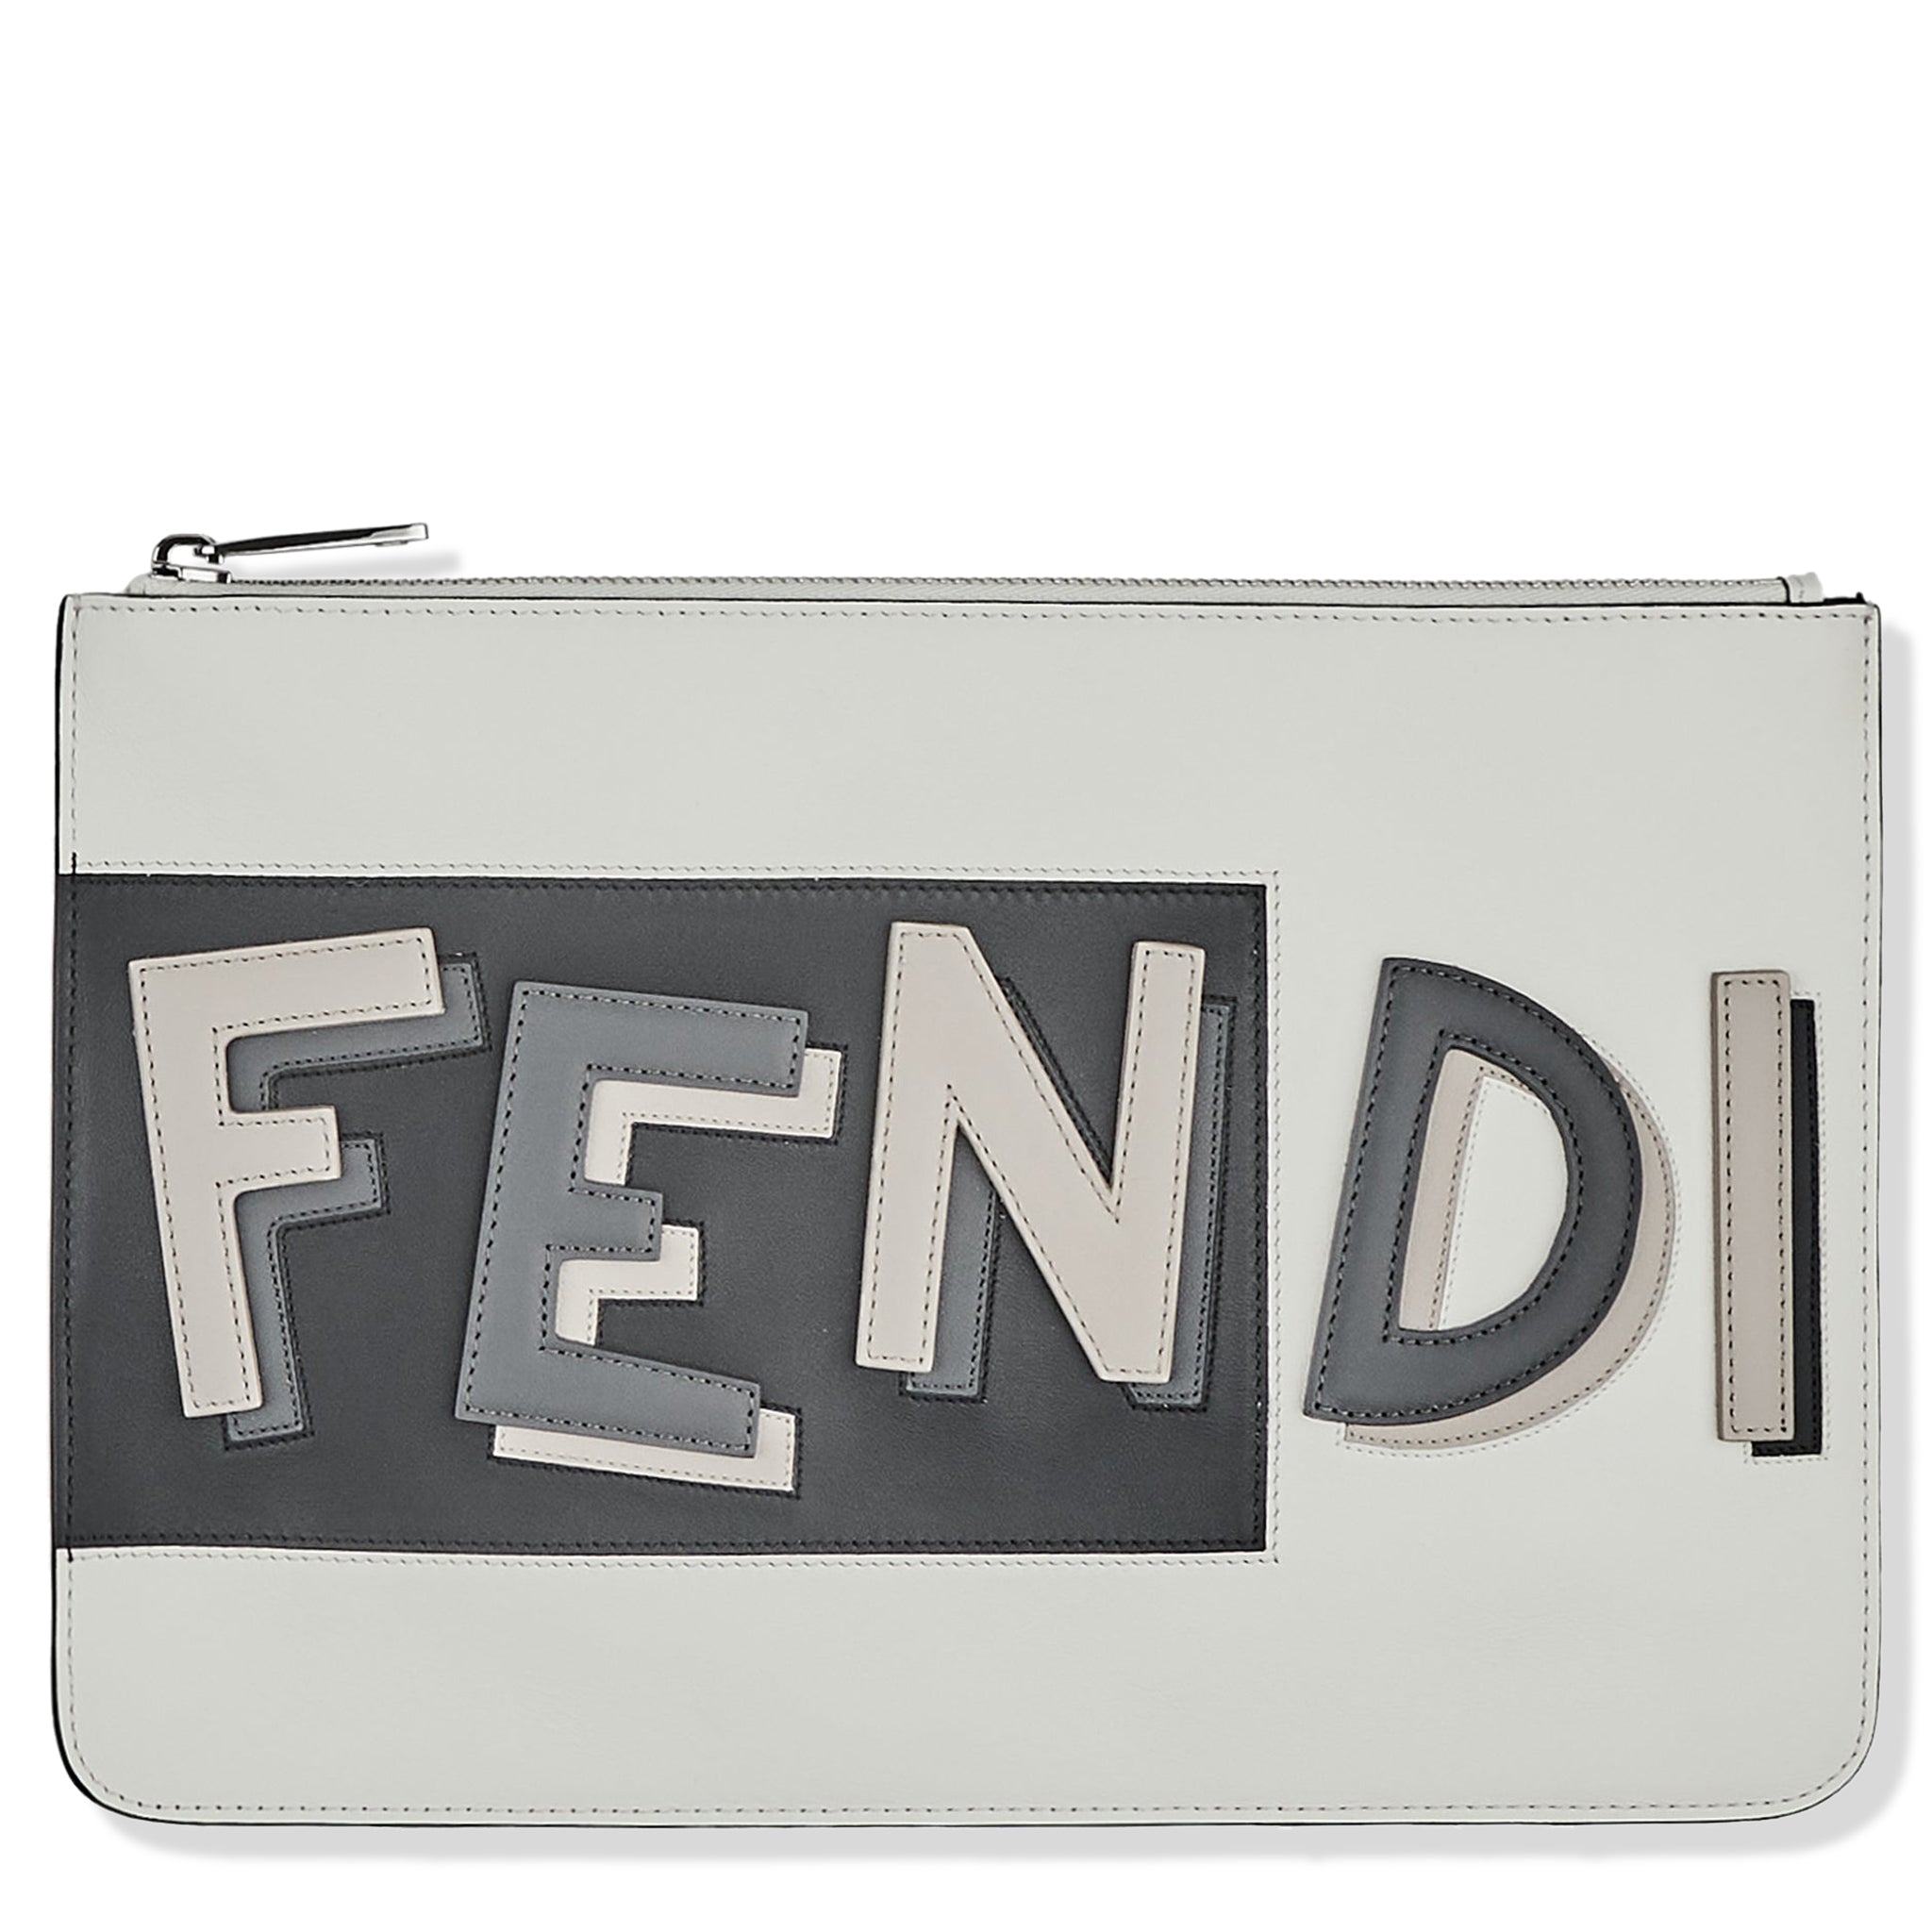 Fendi Outlet: Go To Shopper Mini bag in grained leather - Black